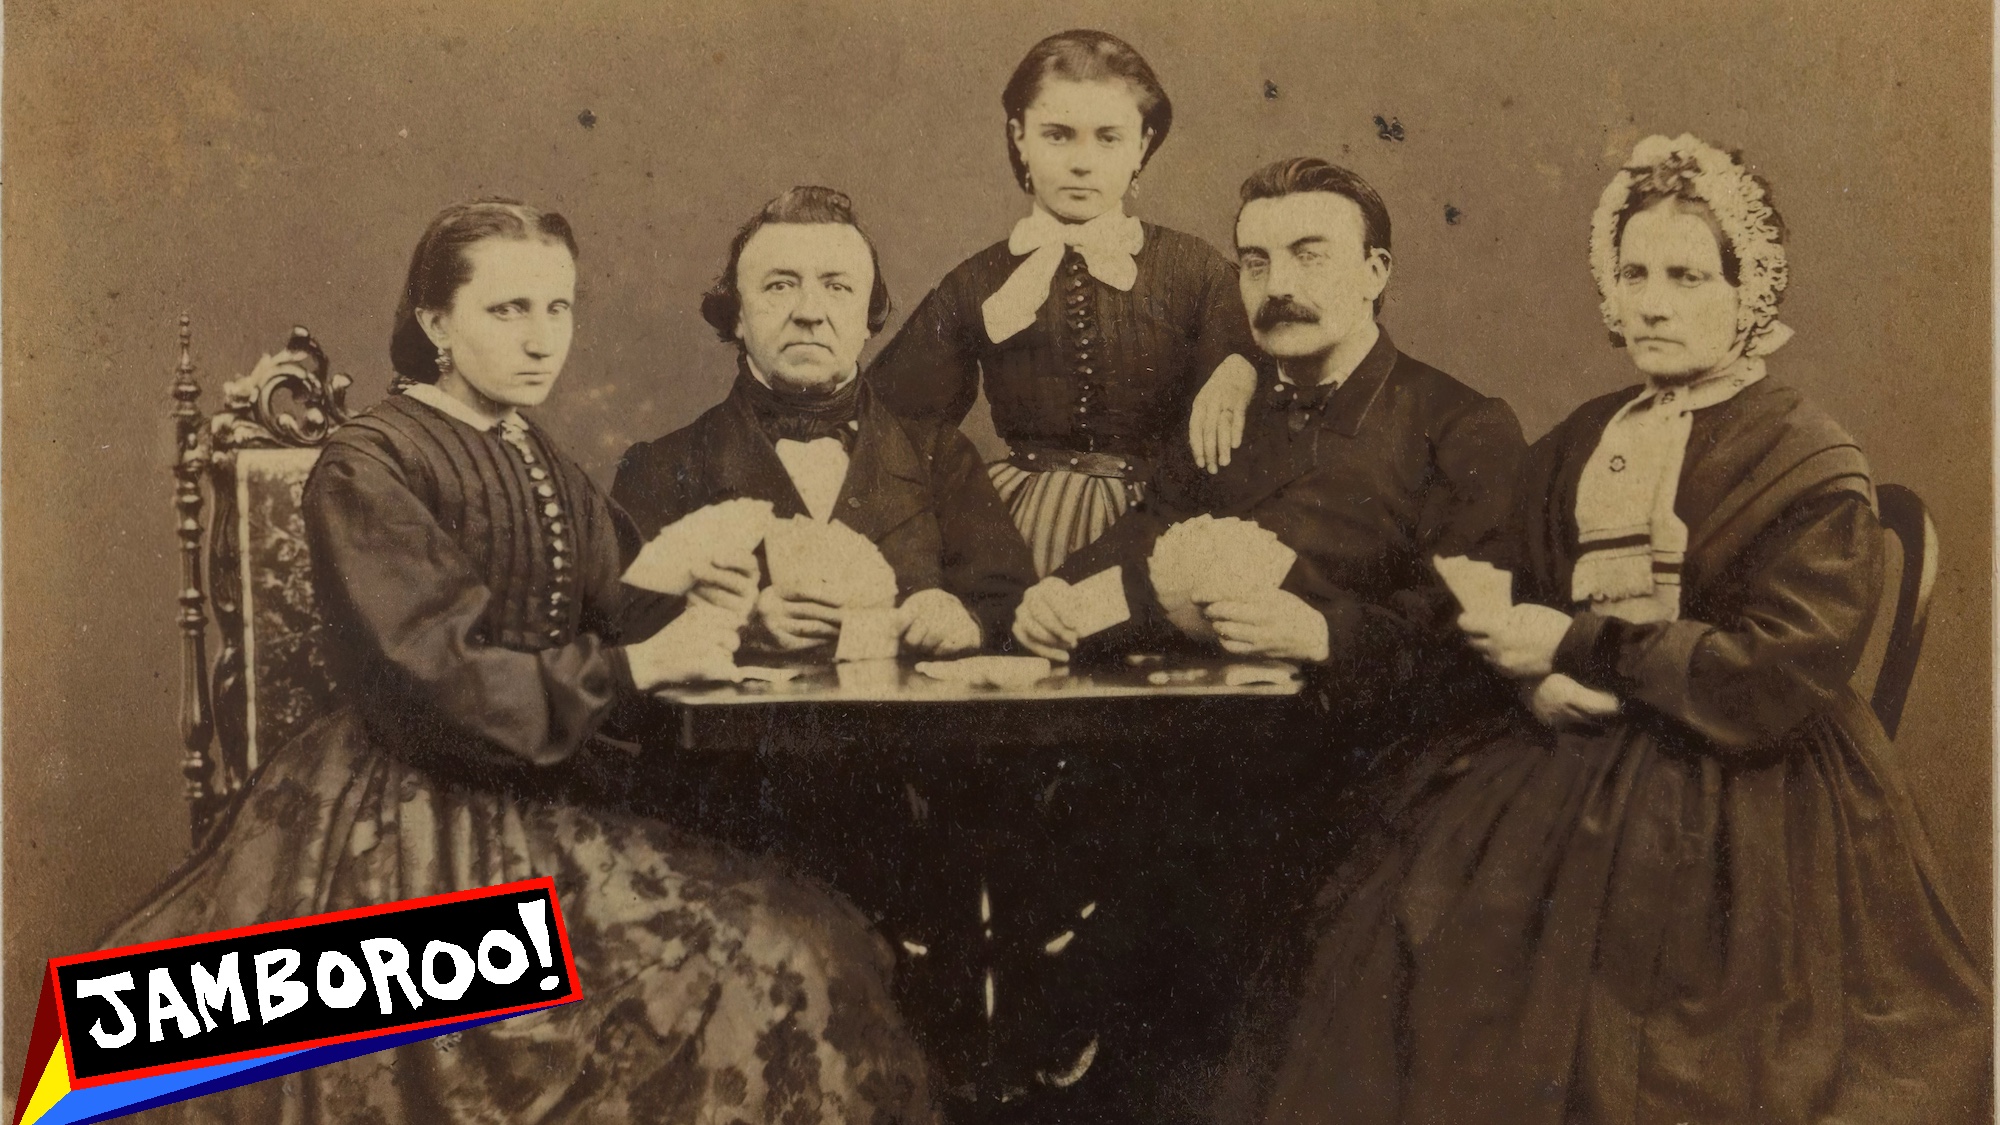 Group portrait of a company playing cards around a table, Frits L.J. Moormans (mentioned on object), Den Bosch, c. 1865 - c. 1880, photographic support, albumen print, height 74 mm × width 91 mm. (Photo by: Sepia Times/Universal Images Group via Getty Images)